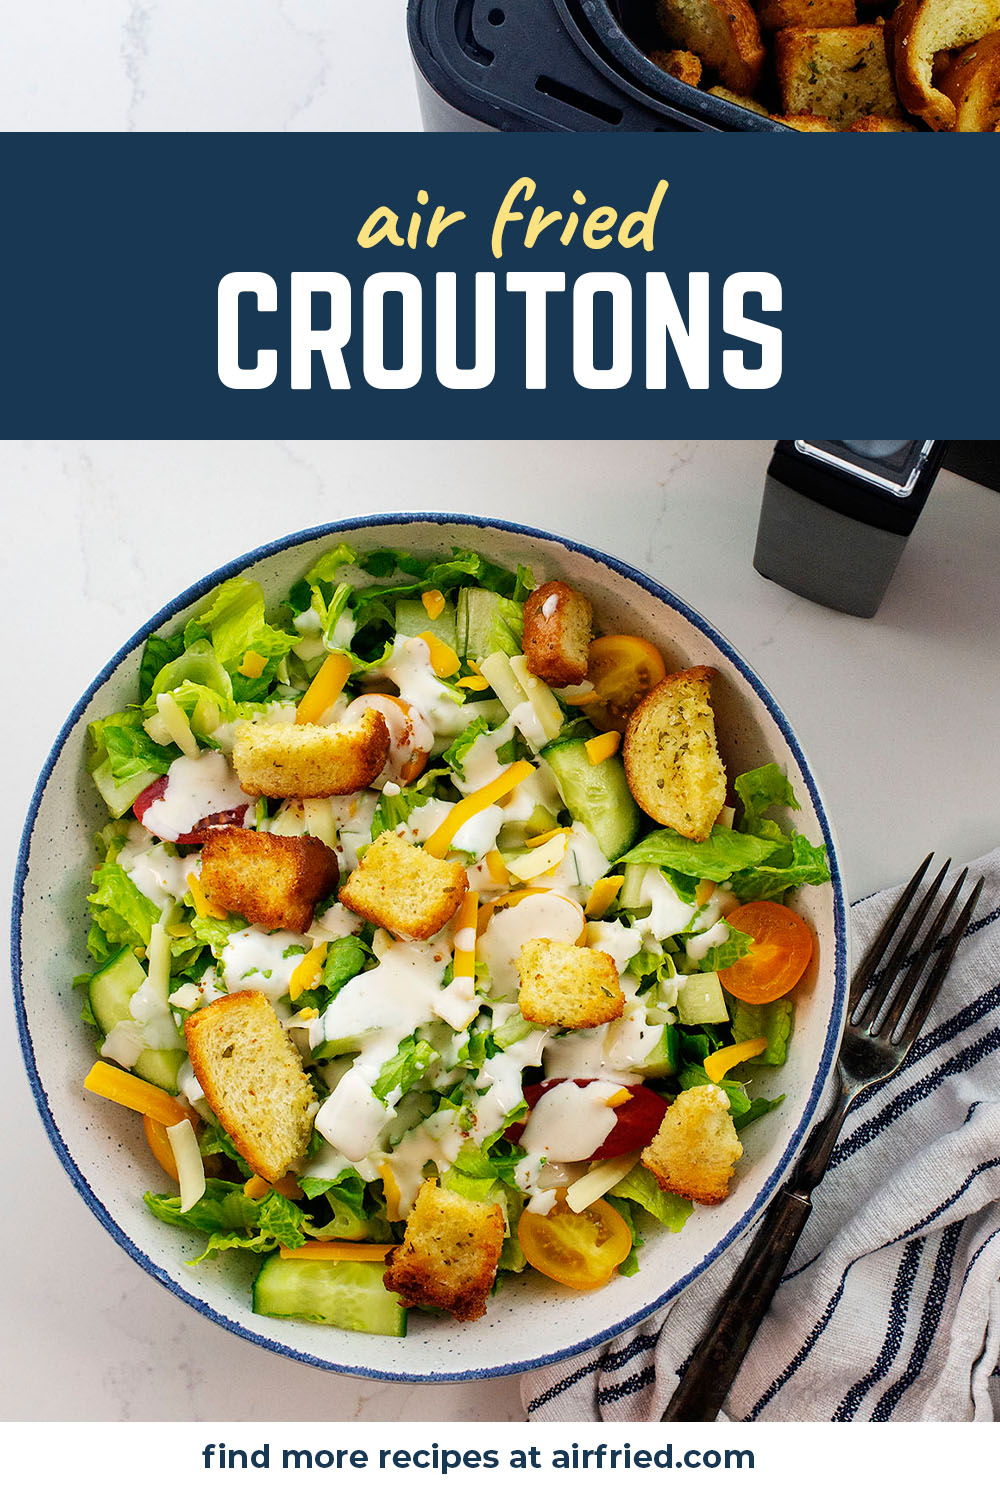 This recipe for air fryer croutons will complete your salad!  Don't skip this key ingredient!